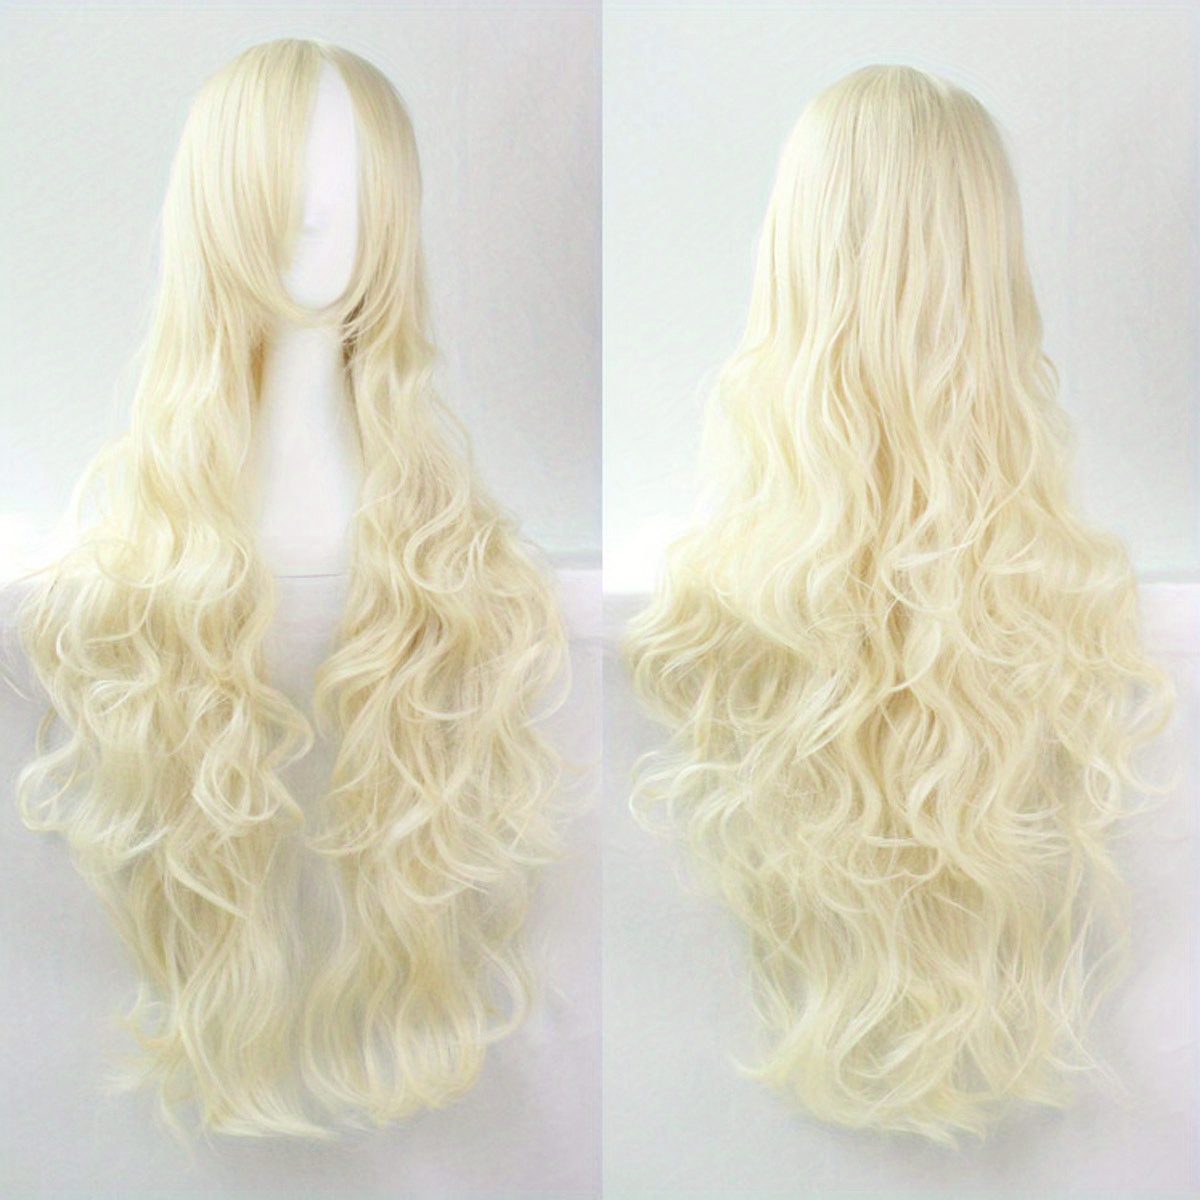 Long Cotton Curly Preppy Hair (Blonde)